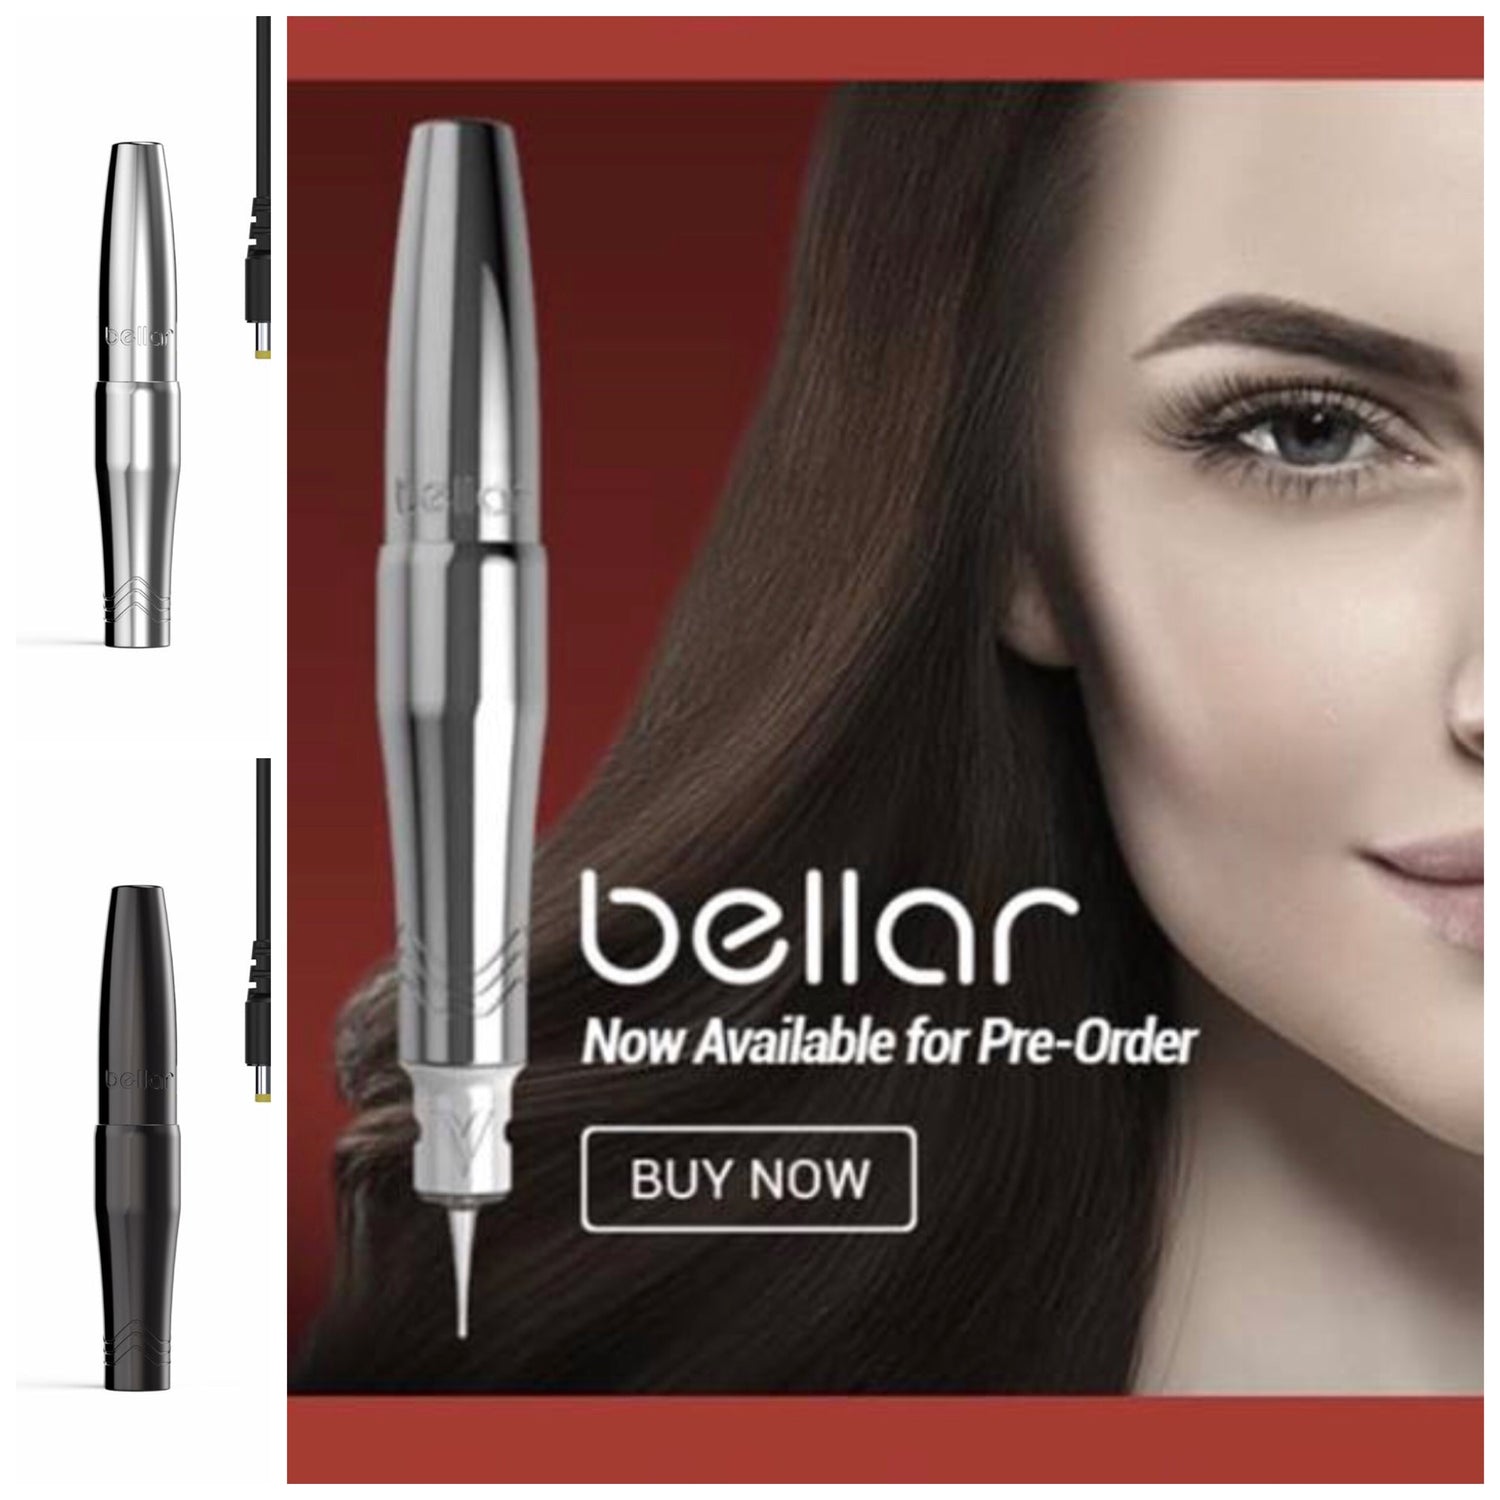 Bellar now available for pre-orders! Save $100.00 and it ships in January! MicroPmu Tattoo Supply